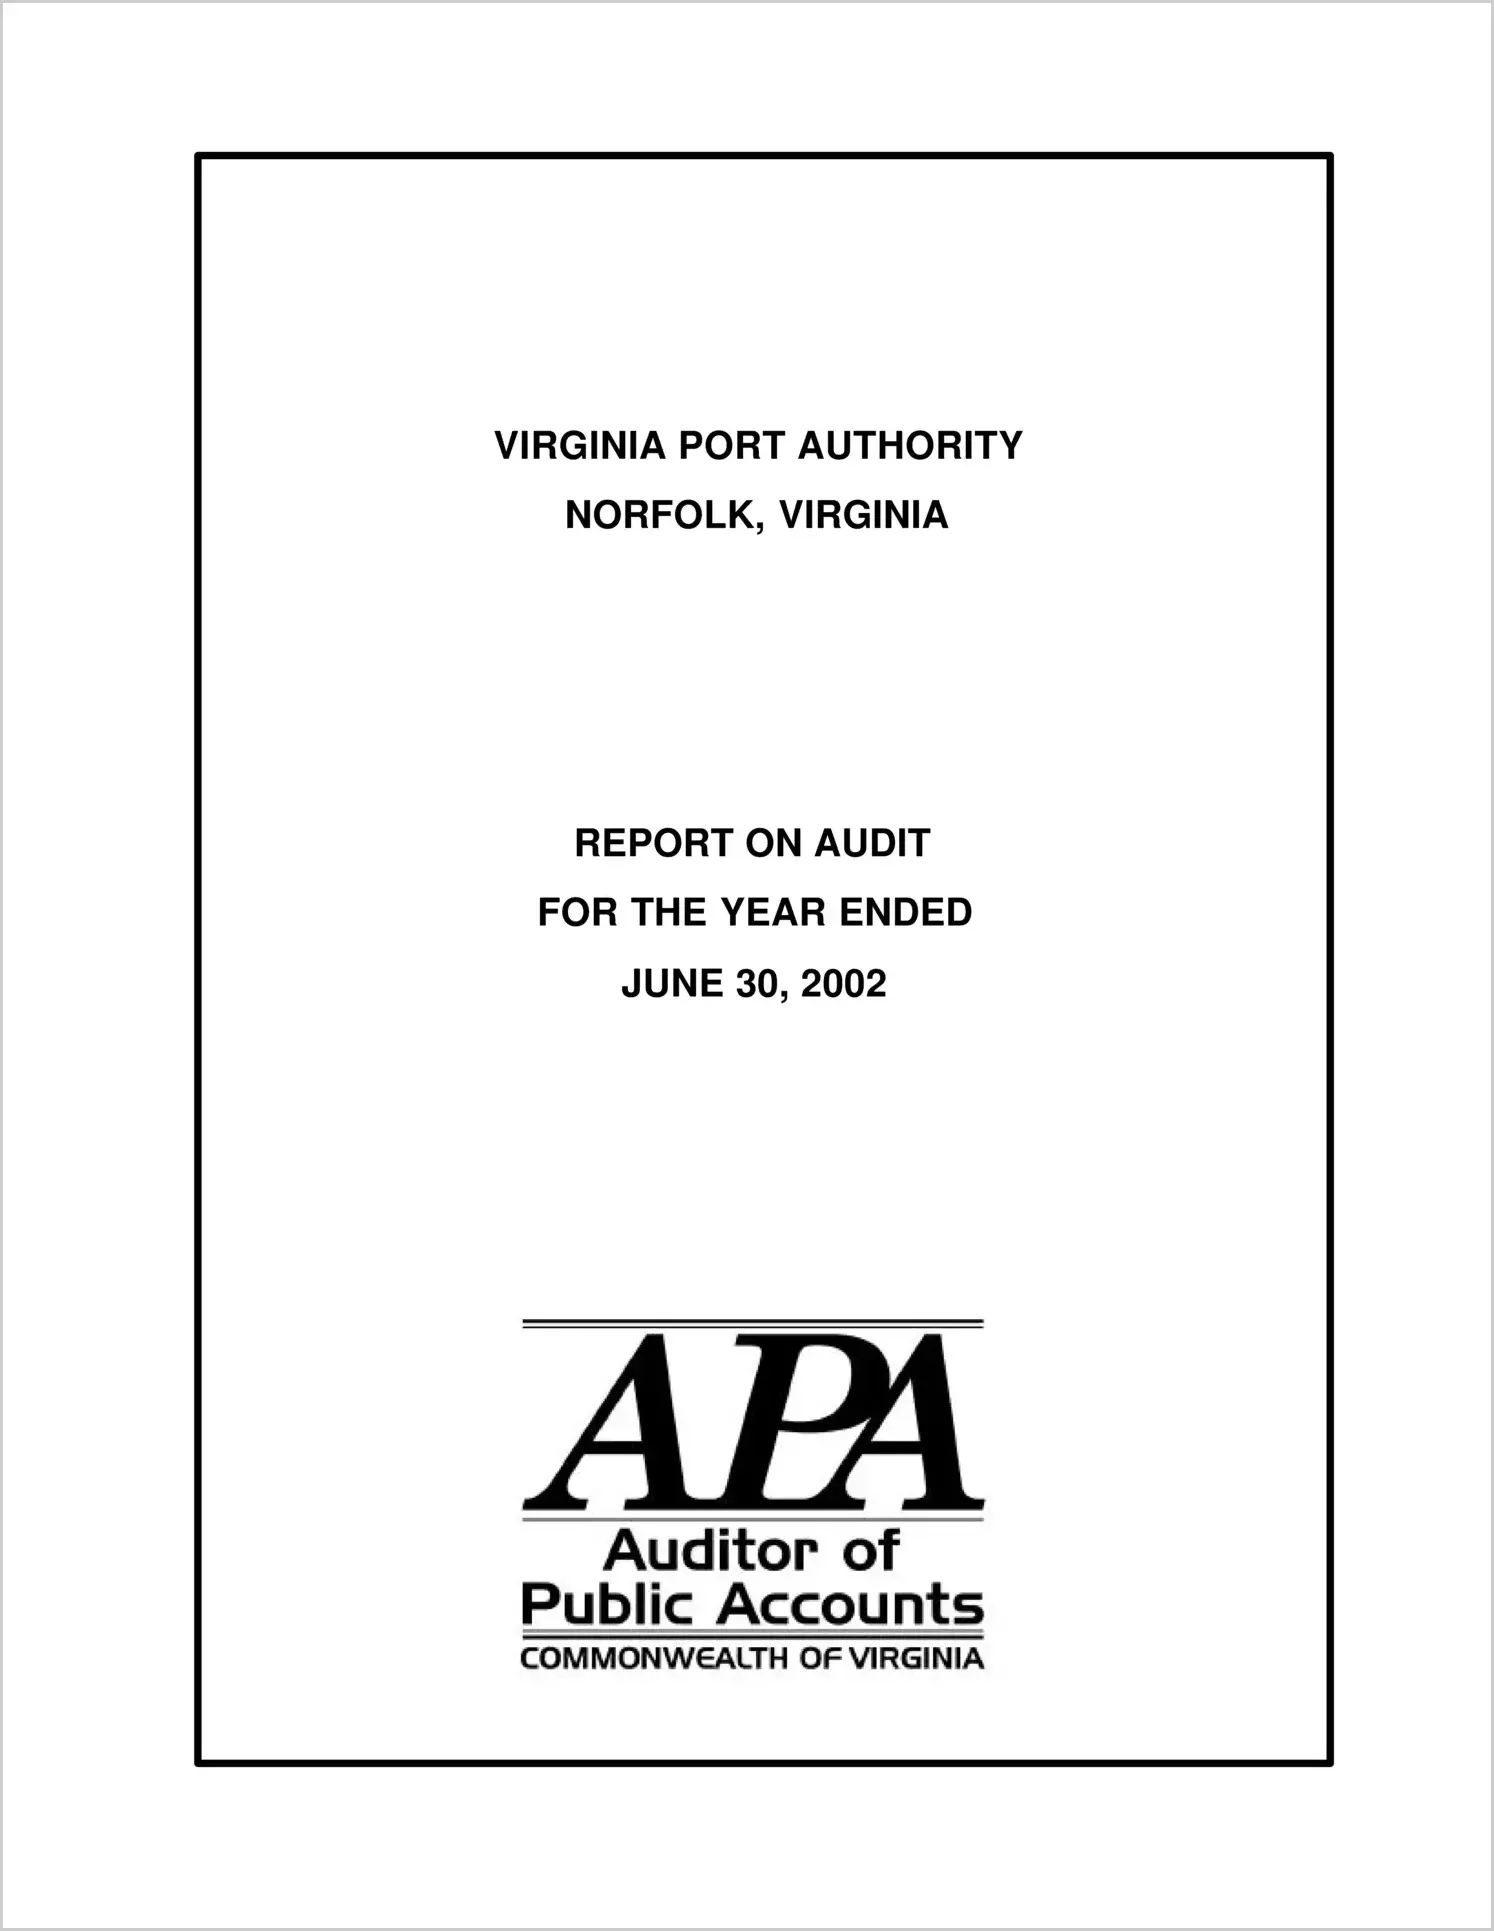 Virginia Port Authority for the year ended June 30, 2002